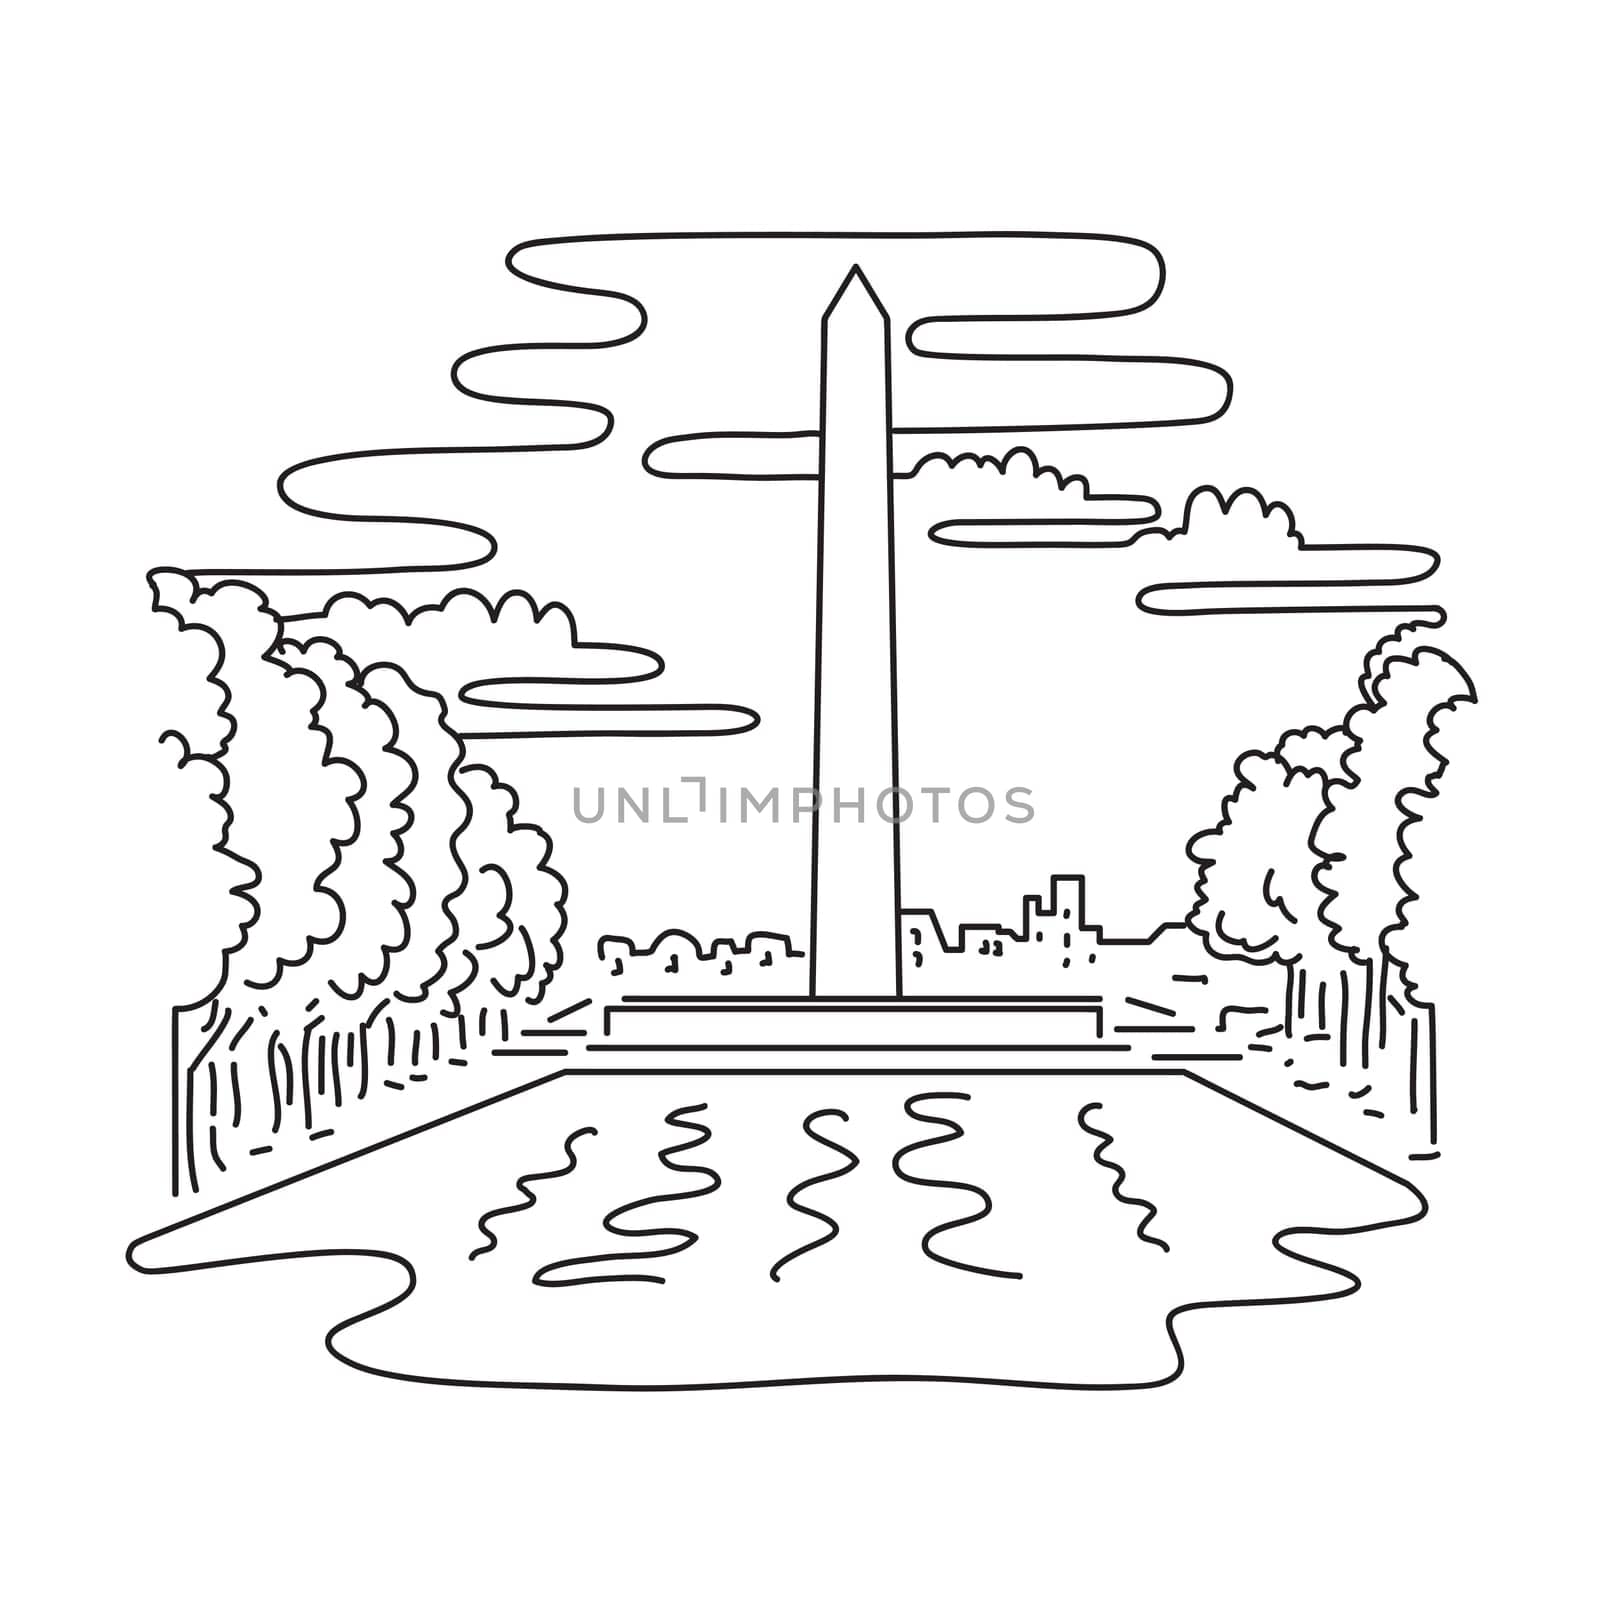 Mono line illustration of the Washington Monument on the National Mall in Washington, DC United States of America done in monoline line black and white art style.